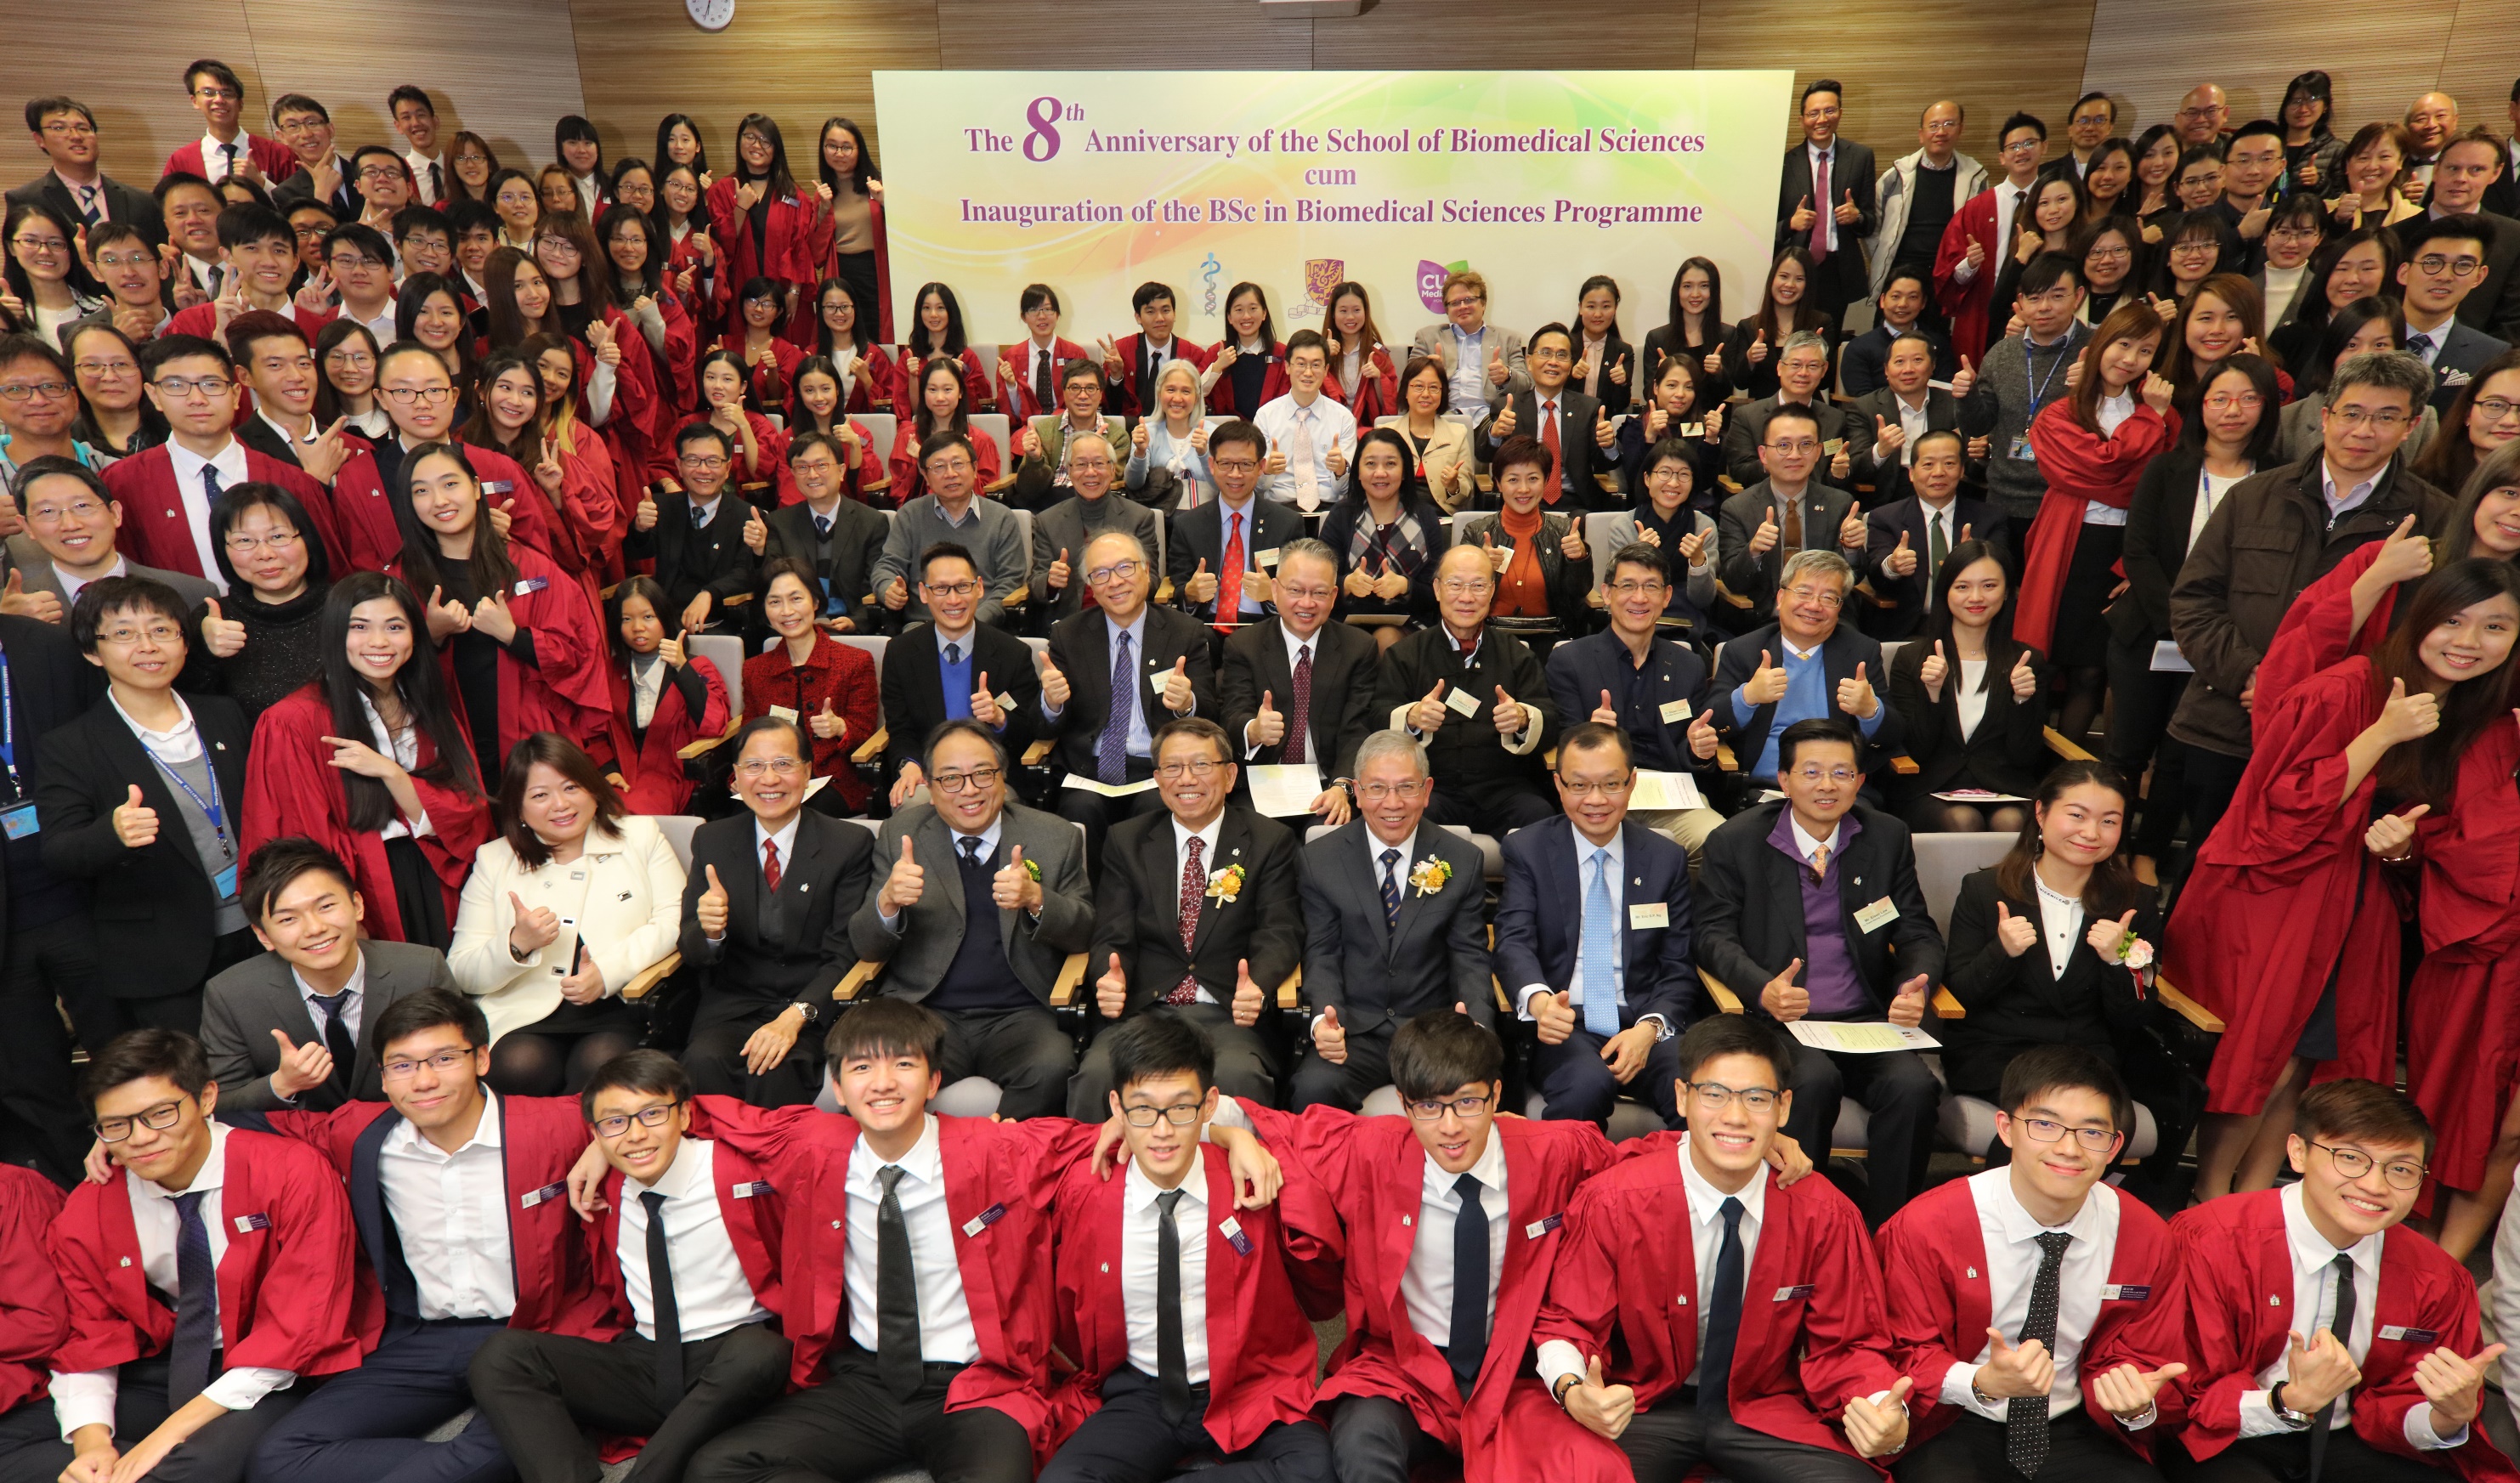  The School of Biomedical Sciences at CUHK celebrates its 8th anniversary. Over a hundred guests, teachers, students and school members gather together to review the past and look forward to the future.